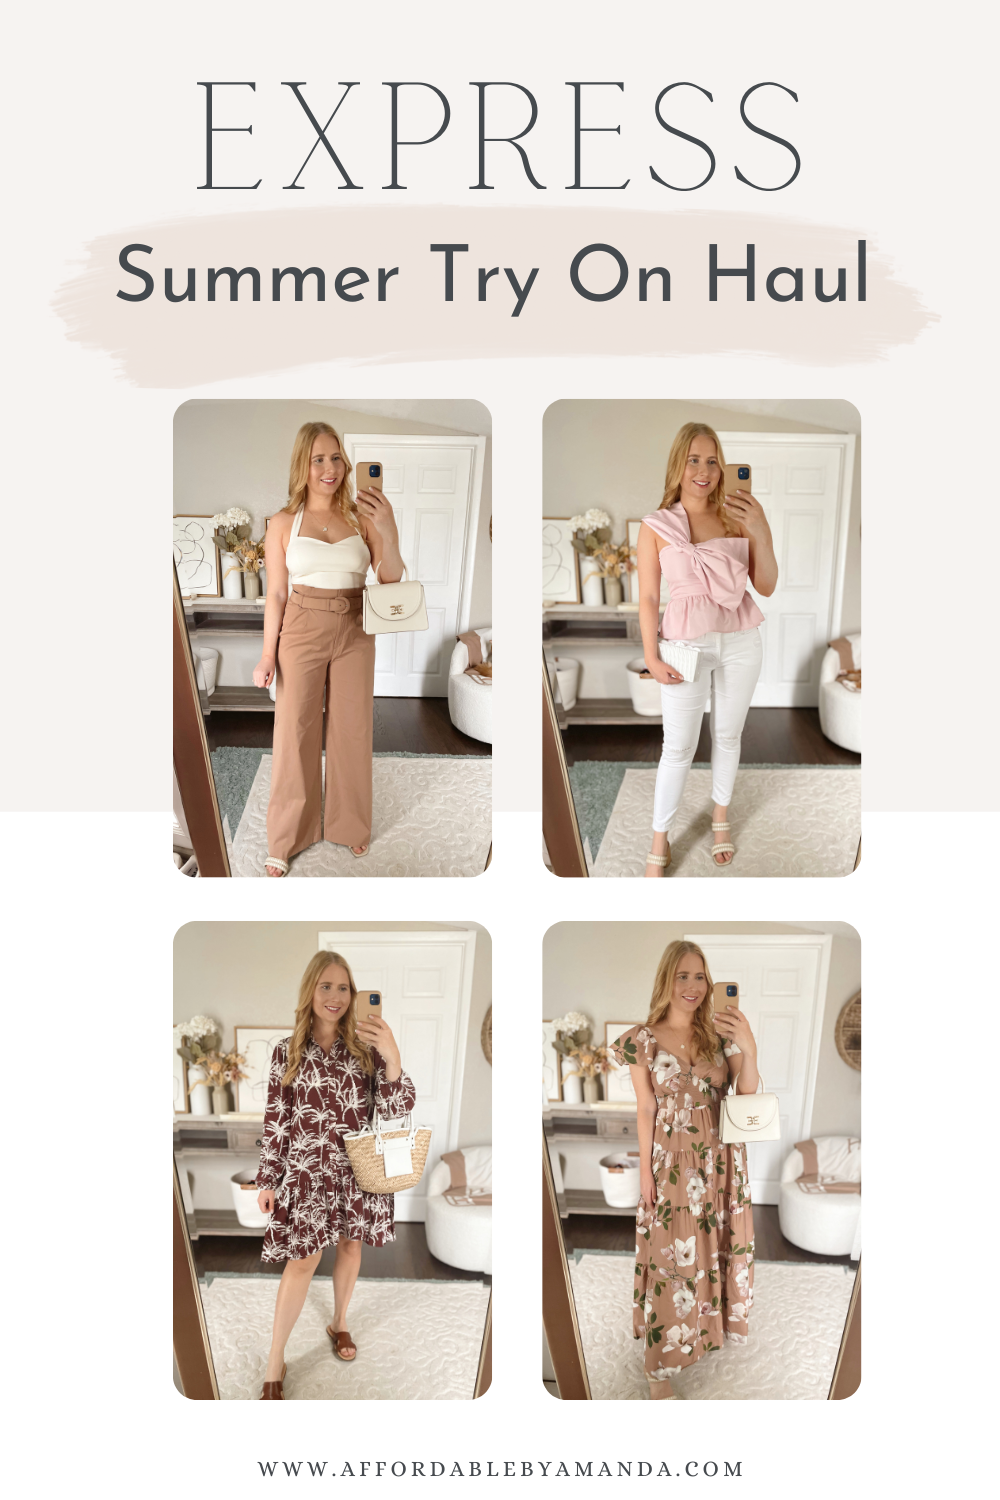 Express Summer Try On Haul - Affordable by Amanda